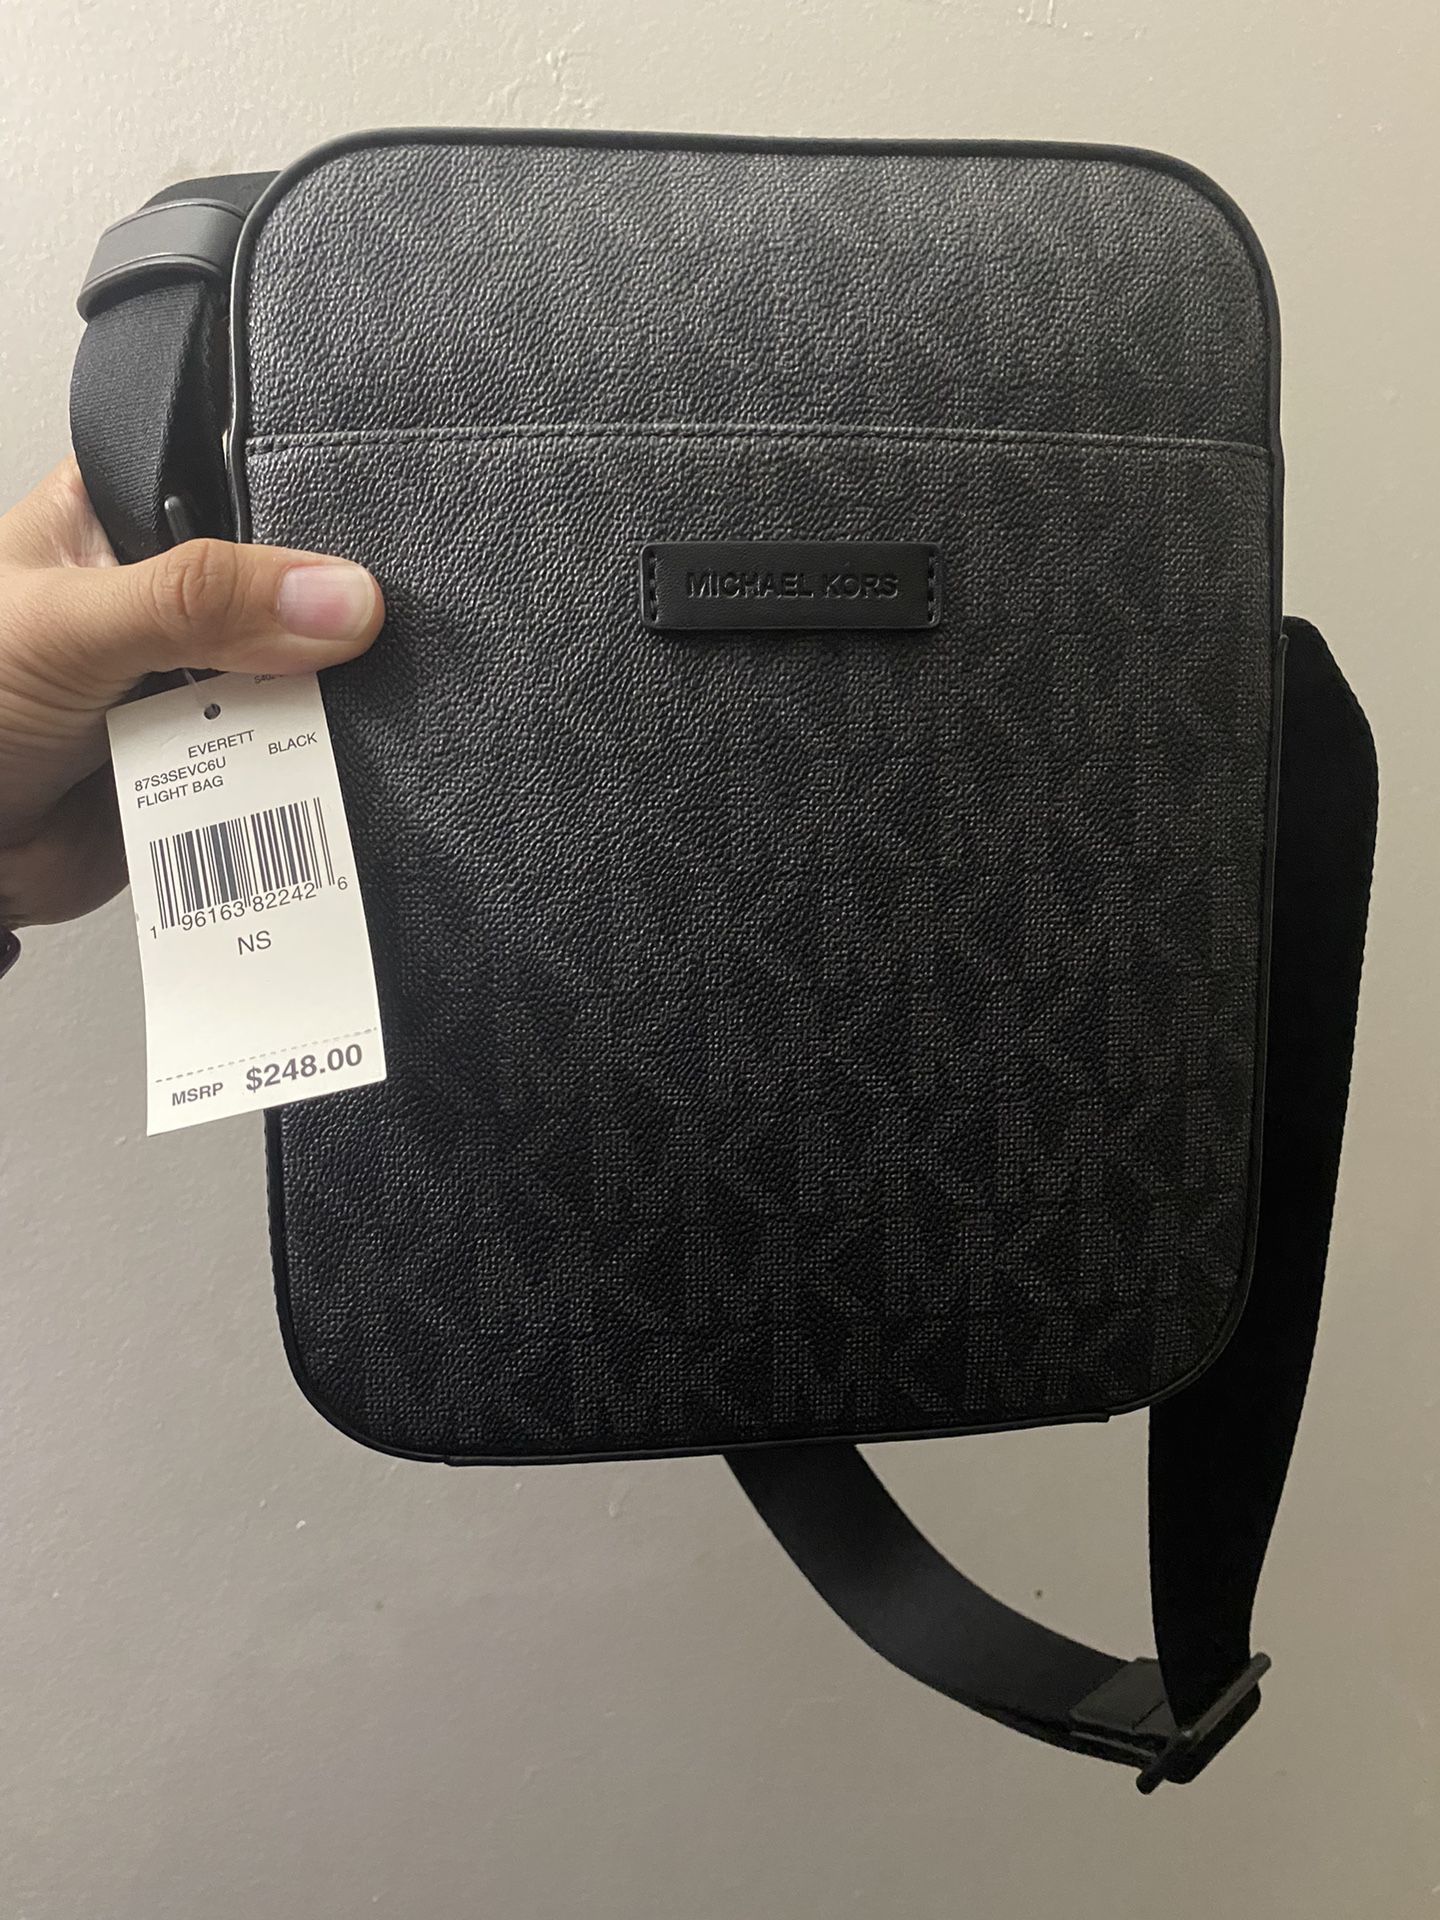 Michael Kors Backpack for Sale in Napa, CA - OfferUp